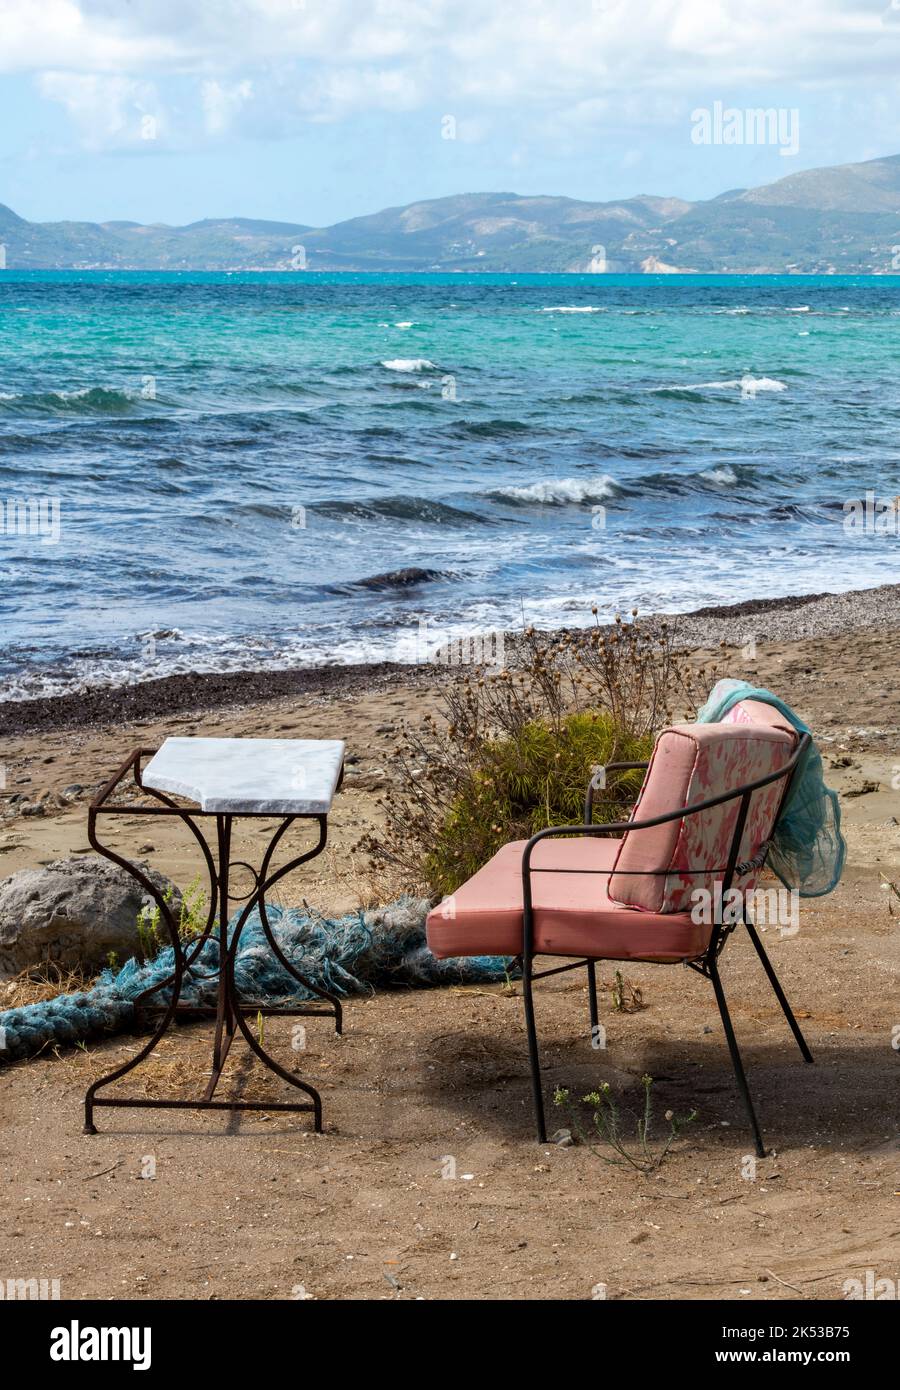 vintage table and chair on the beach at dafni on the greek island of zante or zakynthos with the sea and mountains in the background. Stock Photo